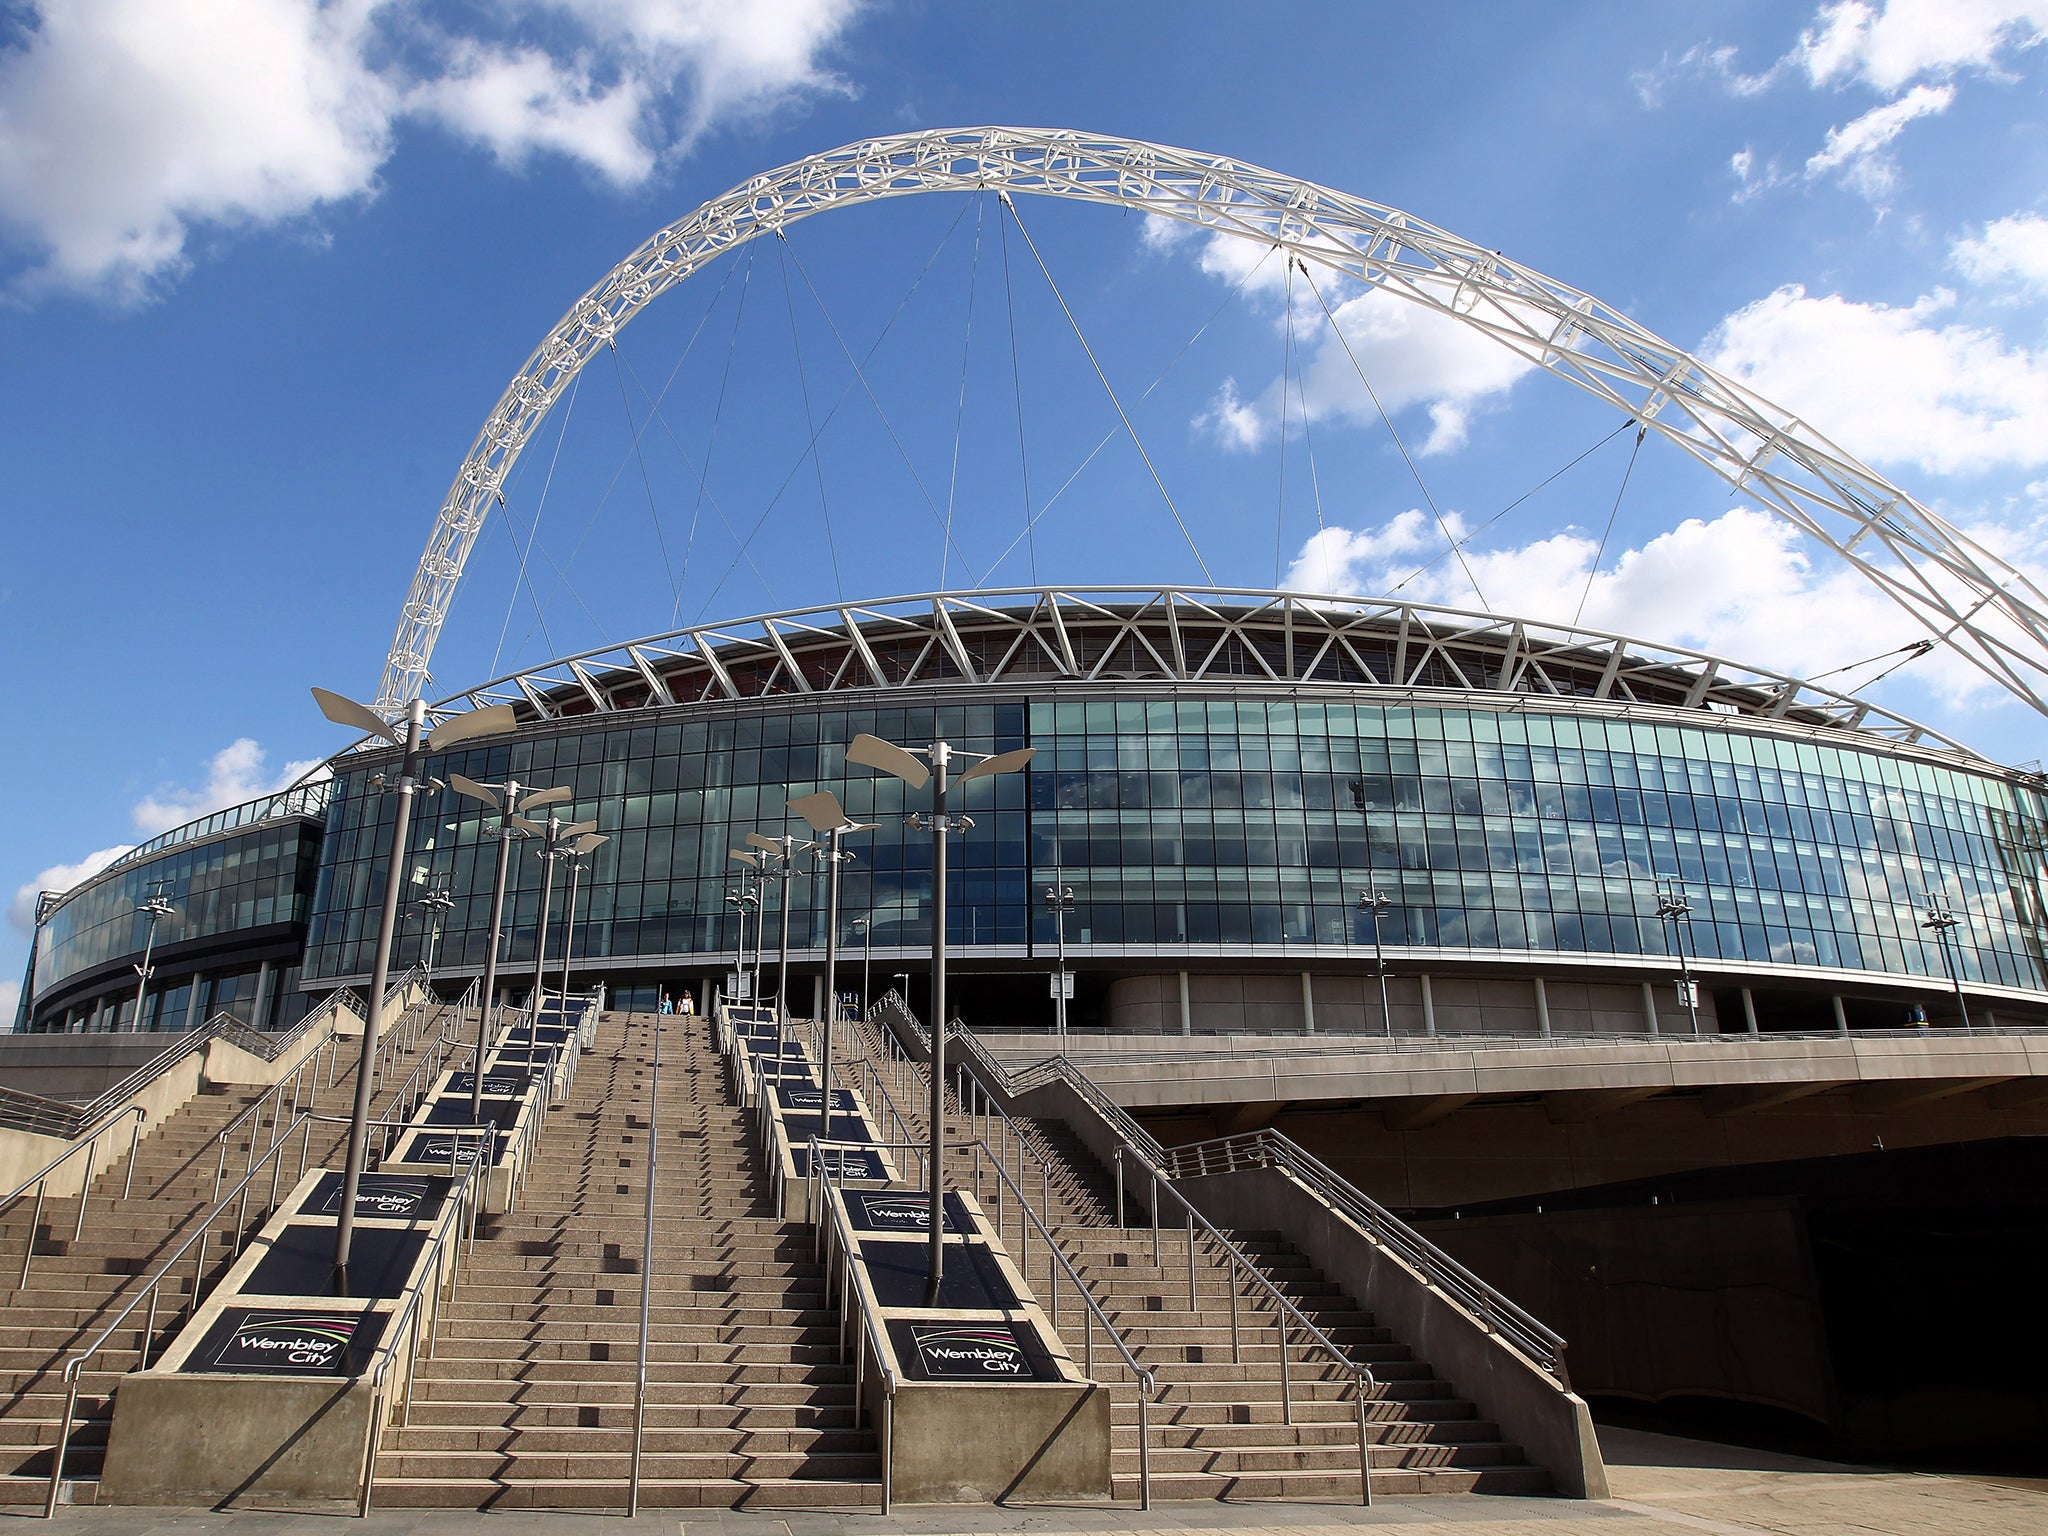 Oakland Raiders and Miami Dolphins play at Wembley on Sunday